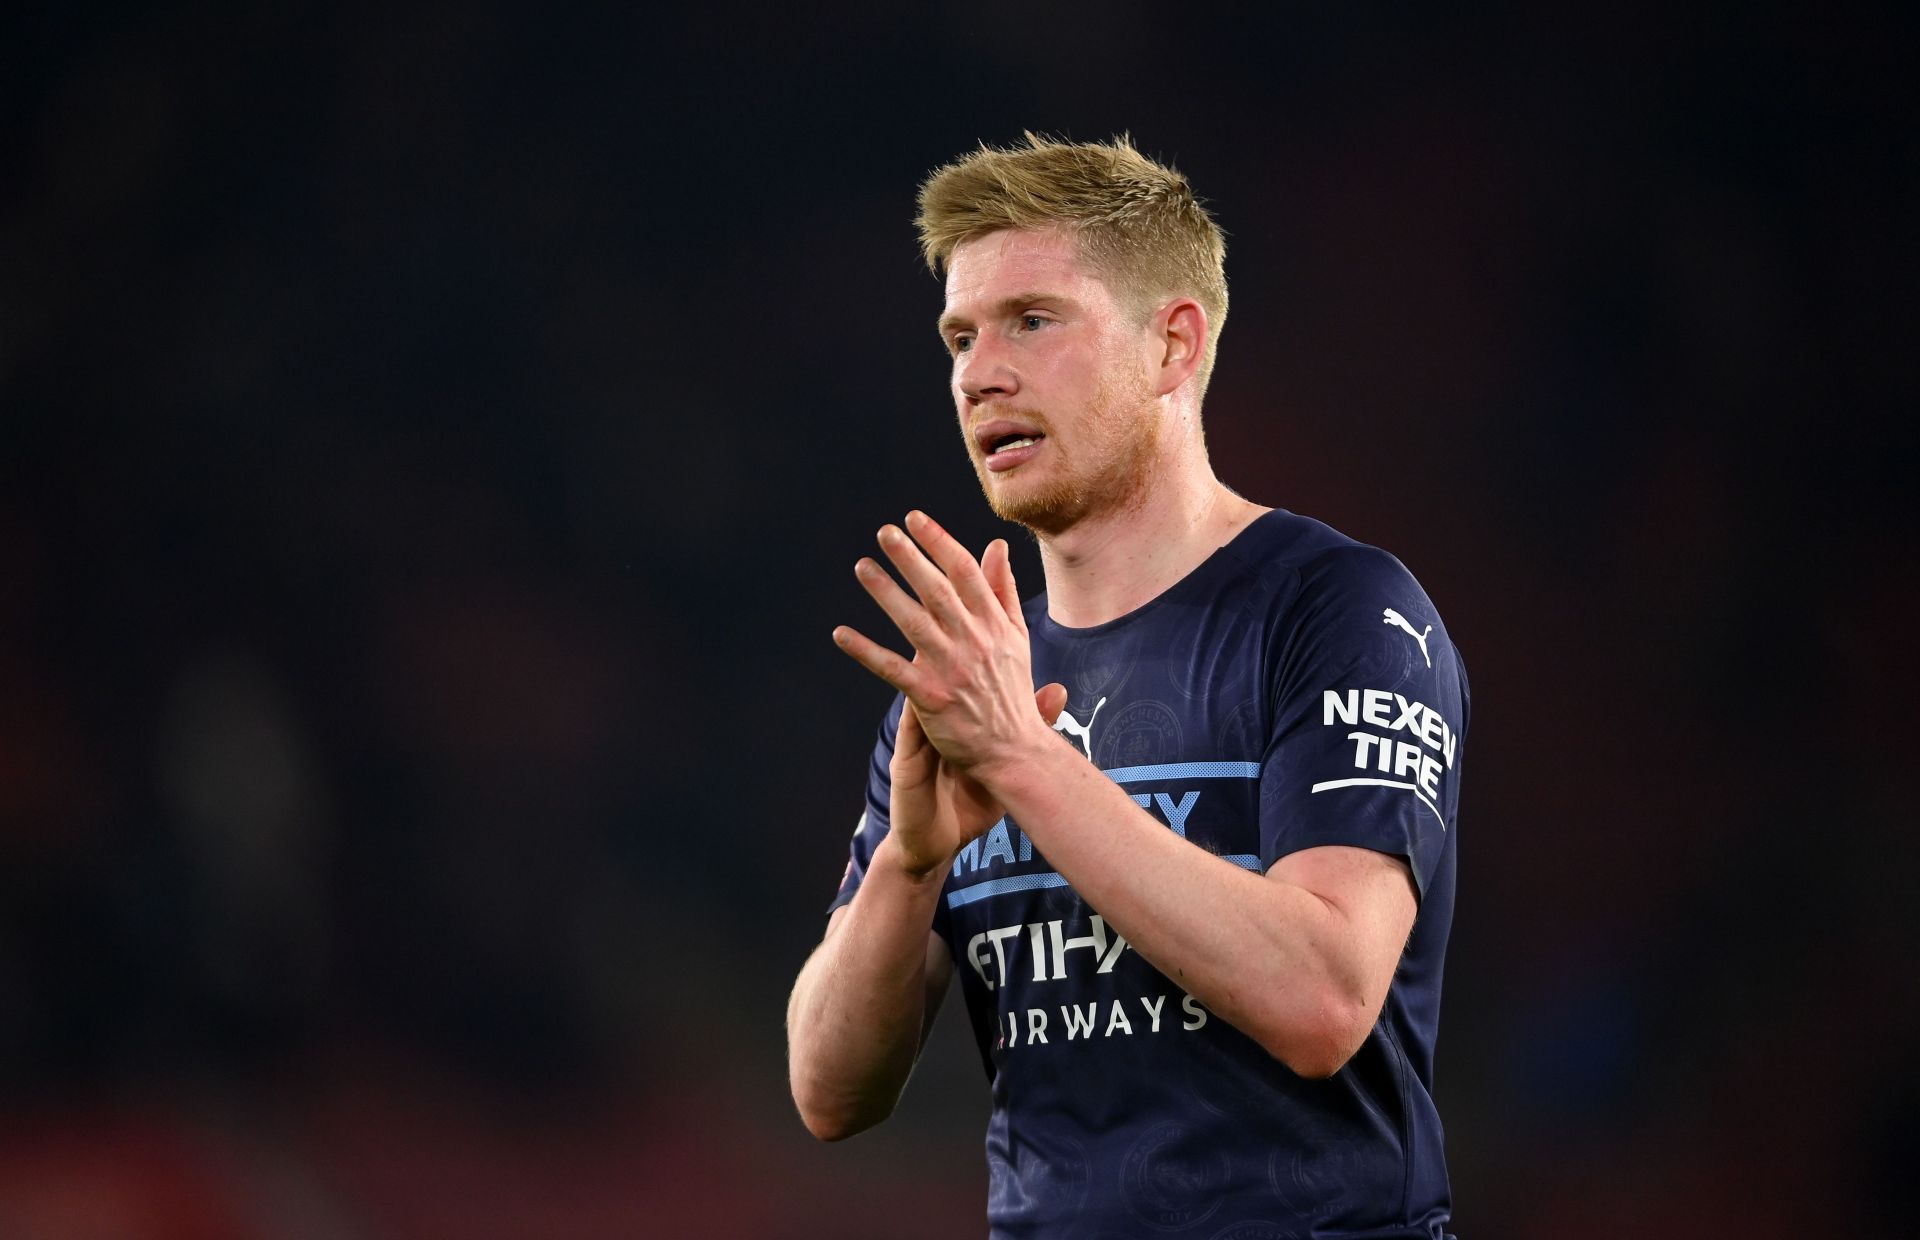 De Bruyne set up Laporte&rsquo;s equaliser with a trademark free-kick.